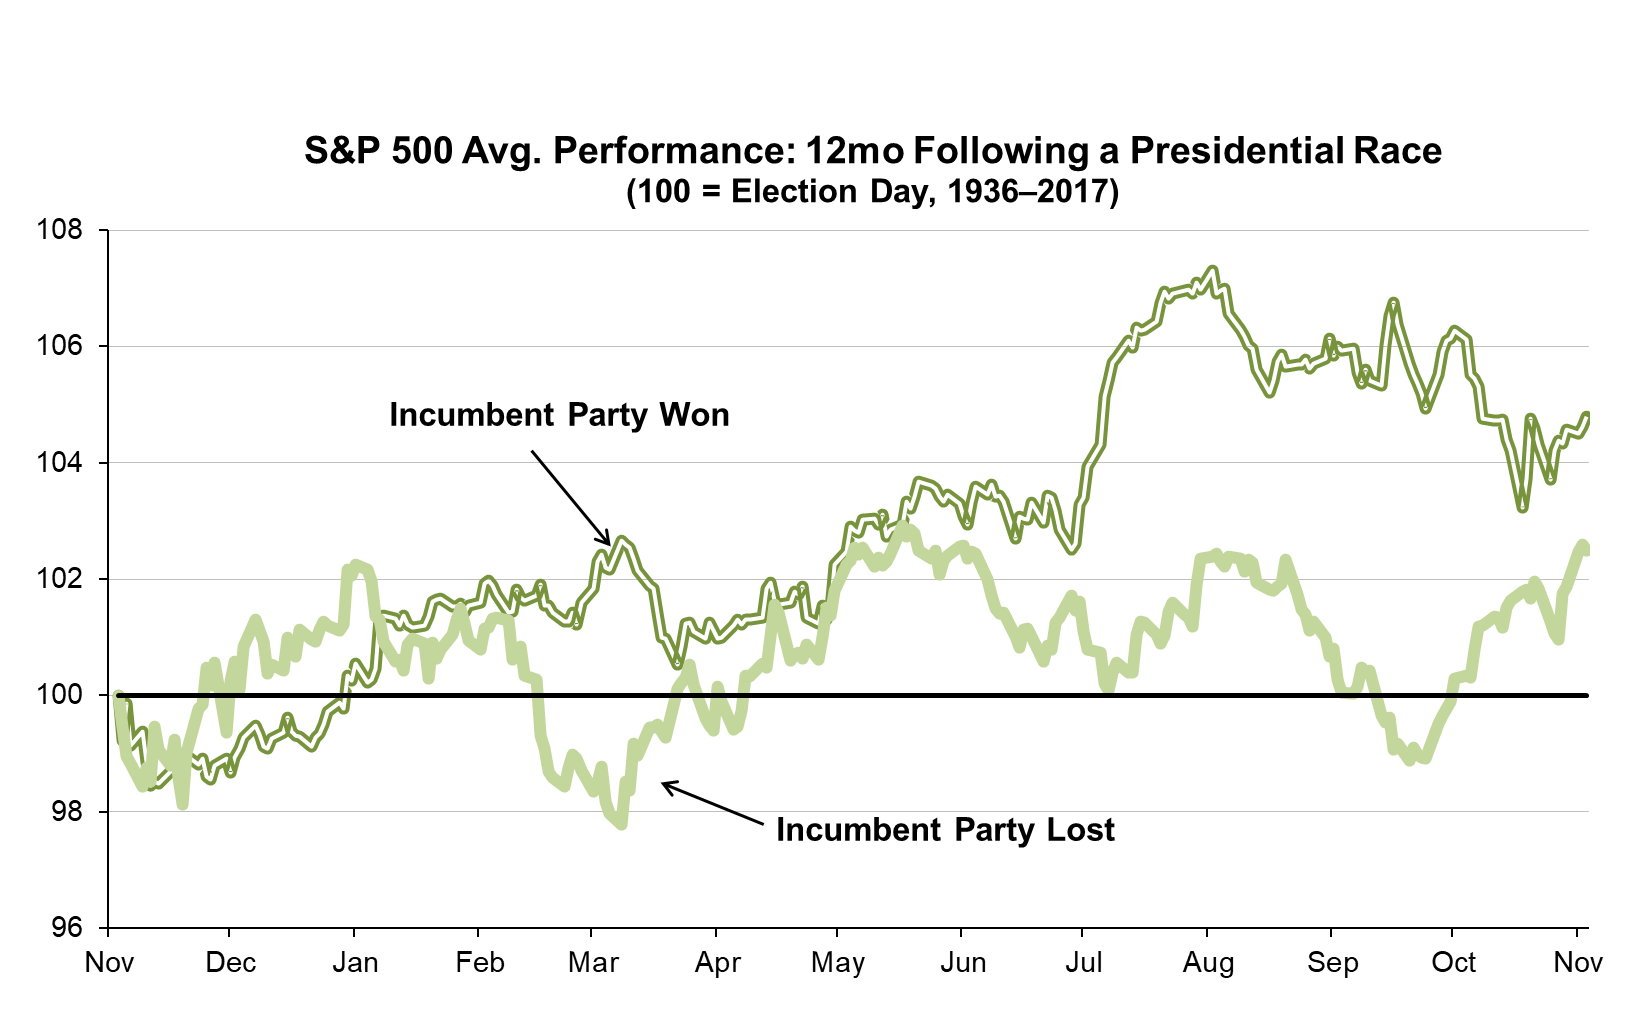 Average S&P 500 Performance: 12mo Following a Presidential Race